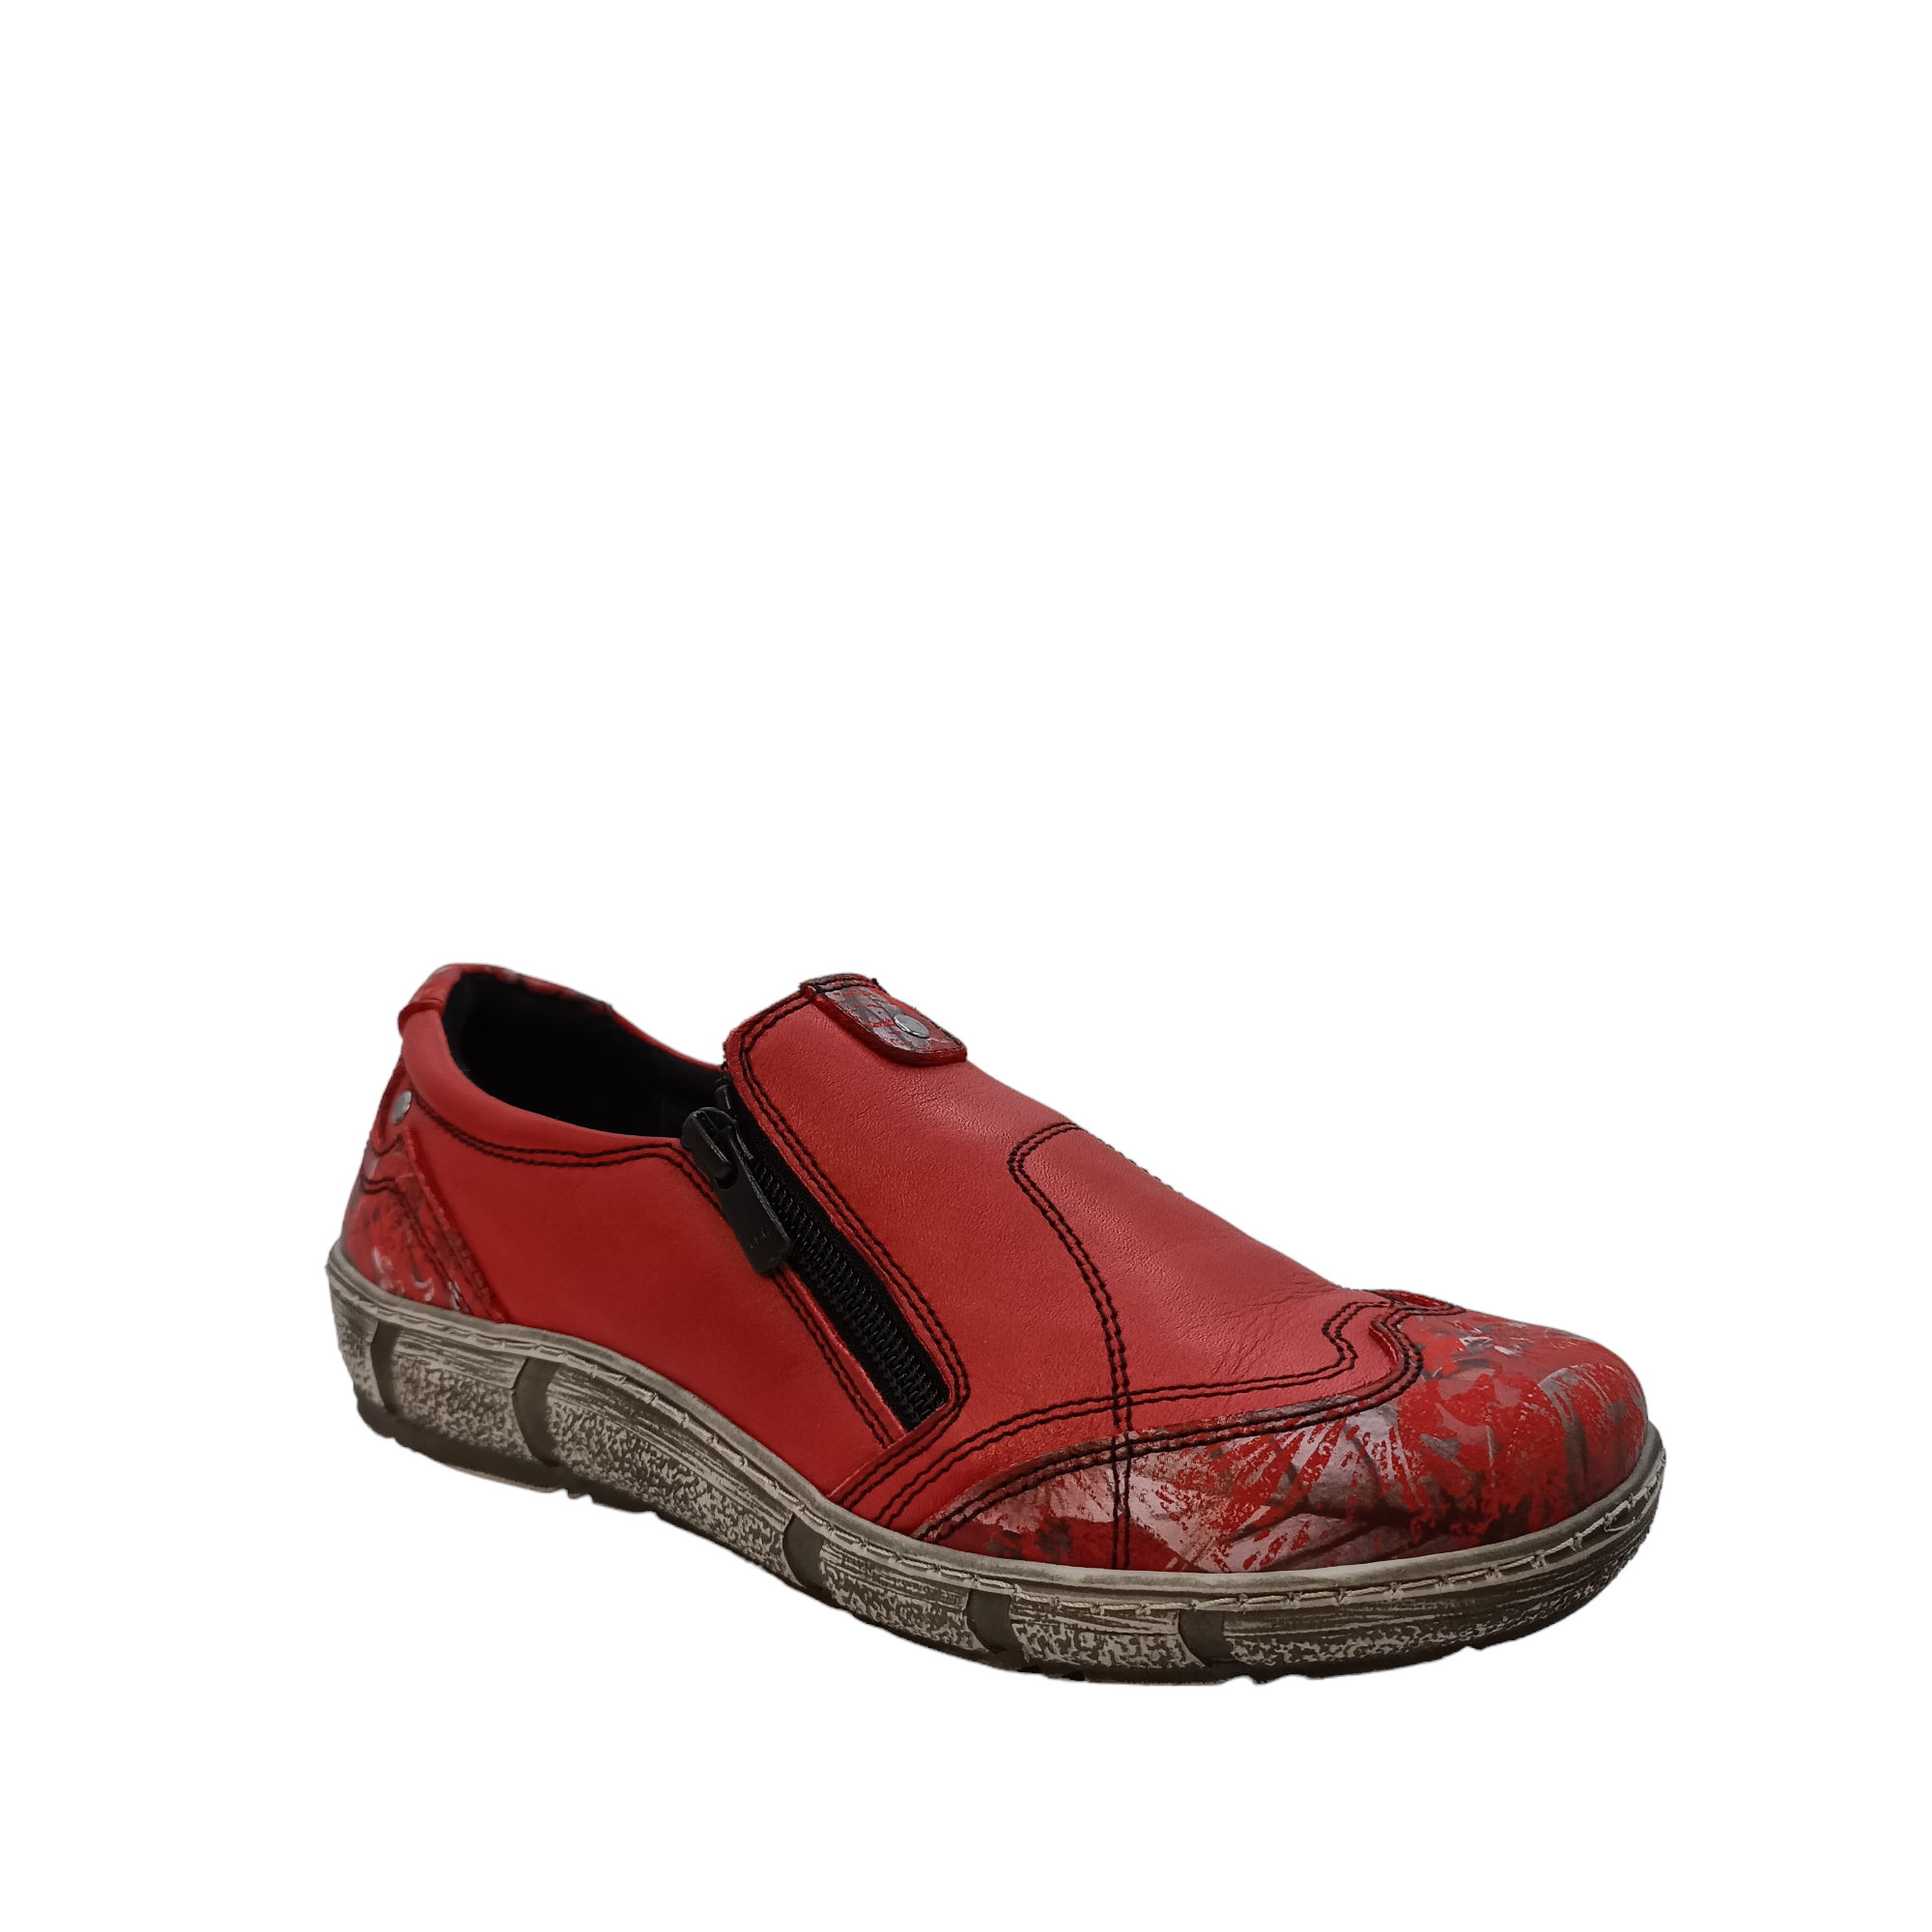 Shop CP794-57 Cabello - with shoe&amp;me - from Cabello - Shoes - Shoe, Winter, Womens - [collection]